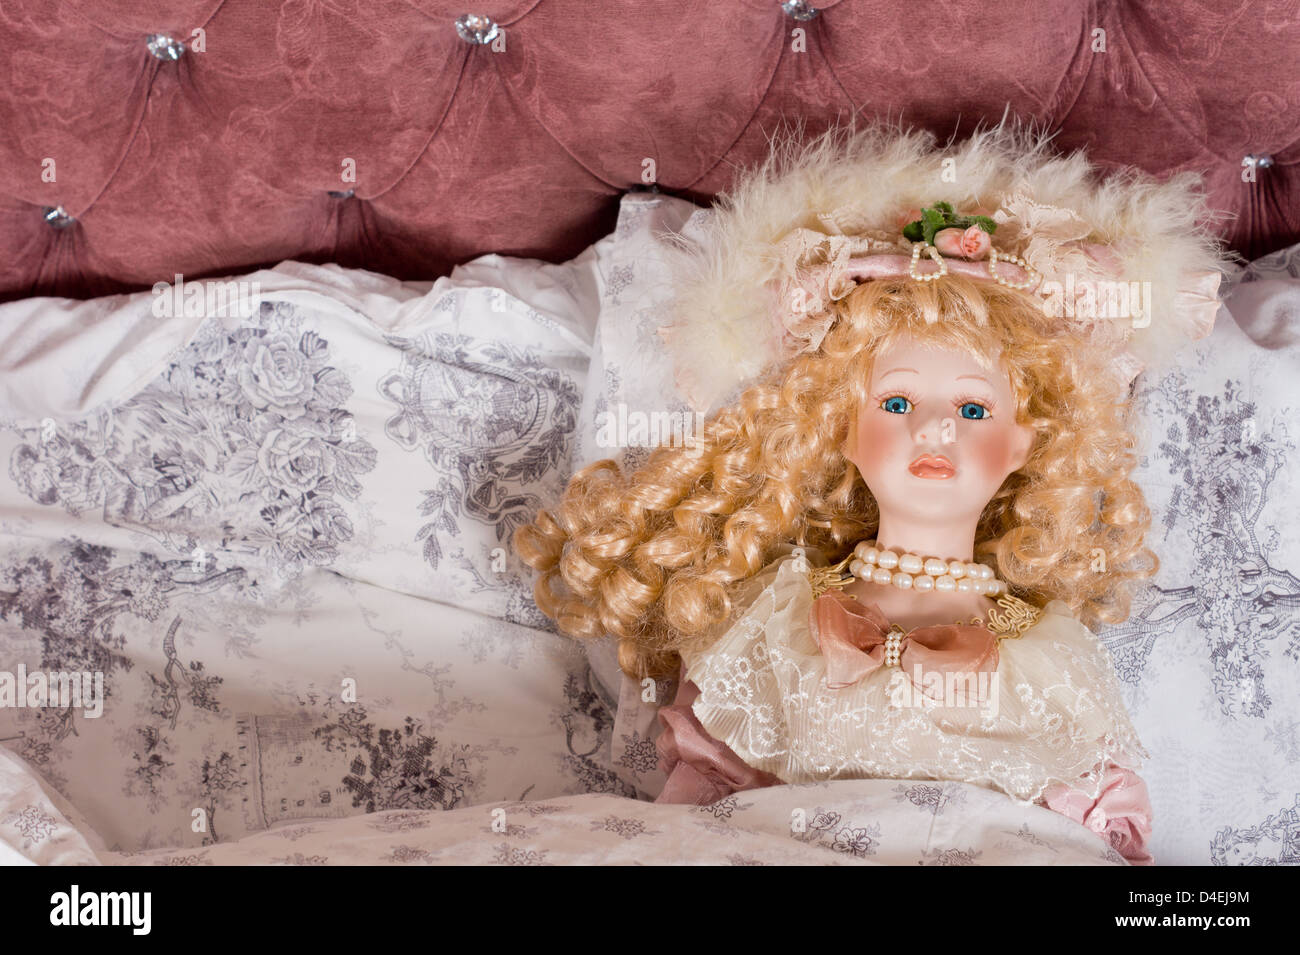 Face of a beautiful vintage doll with her long blonde hair in ringlets and wearing pearls and a fancy hat lying on a bed Stock Photo